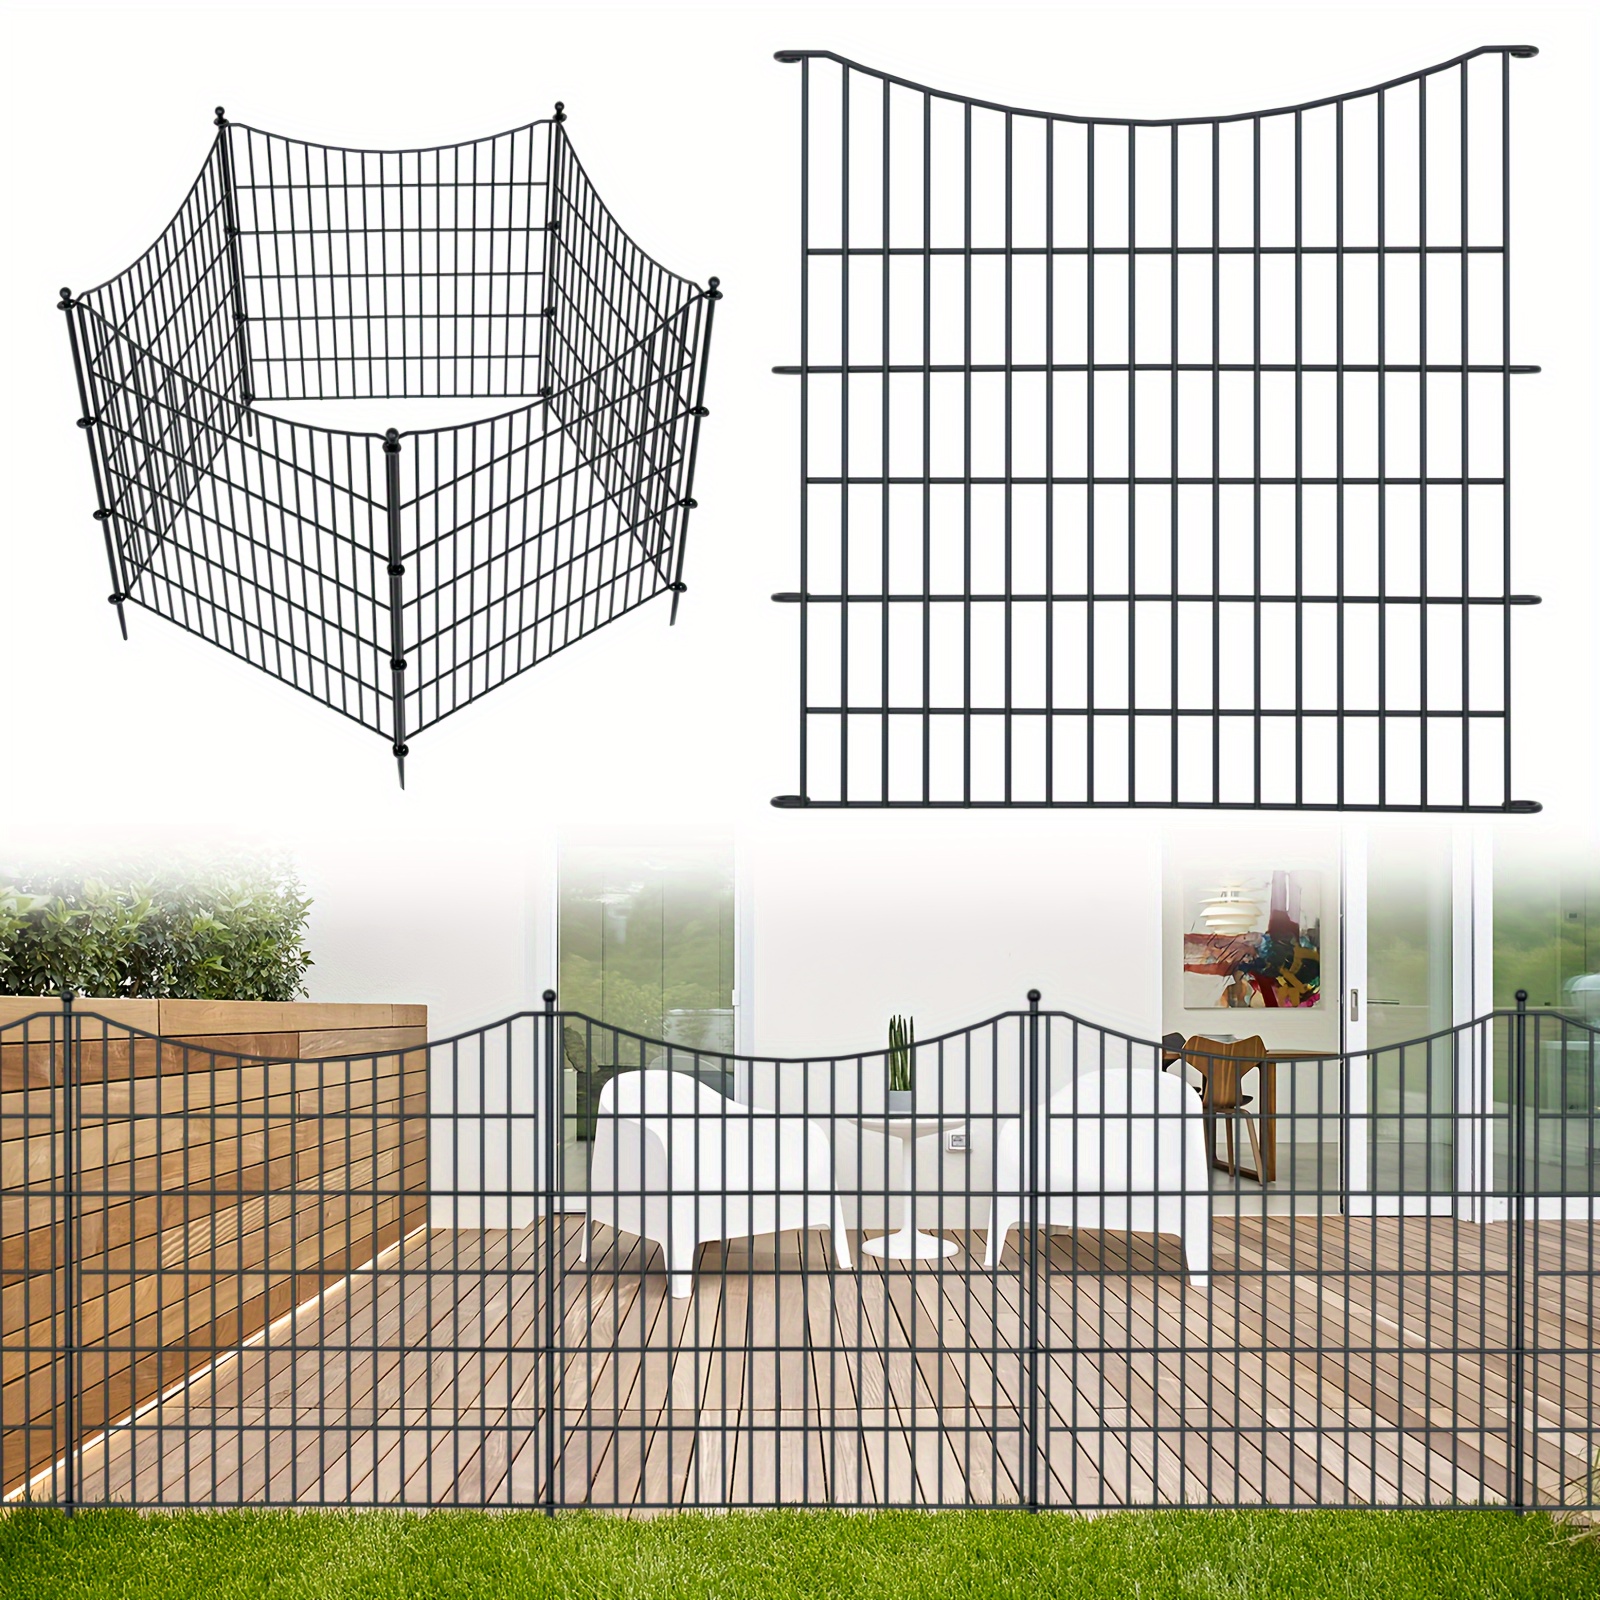 

5/10pcs Metal Garden Fence Panels, No Dig Decorative Outdoor Barrier, Rustproof Wire Fencing For Dogs, Rabbits, Patio - Includes Temporary Ground Stakes